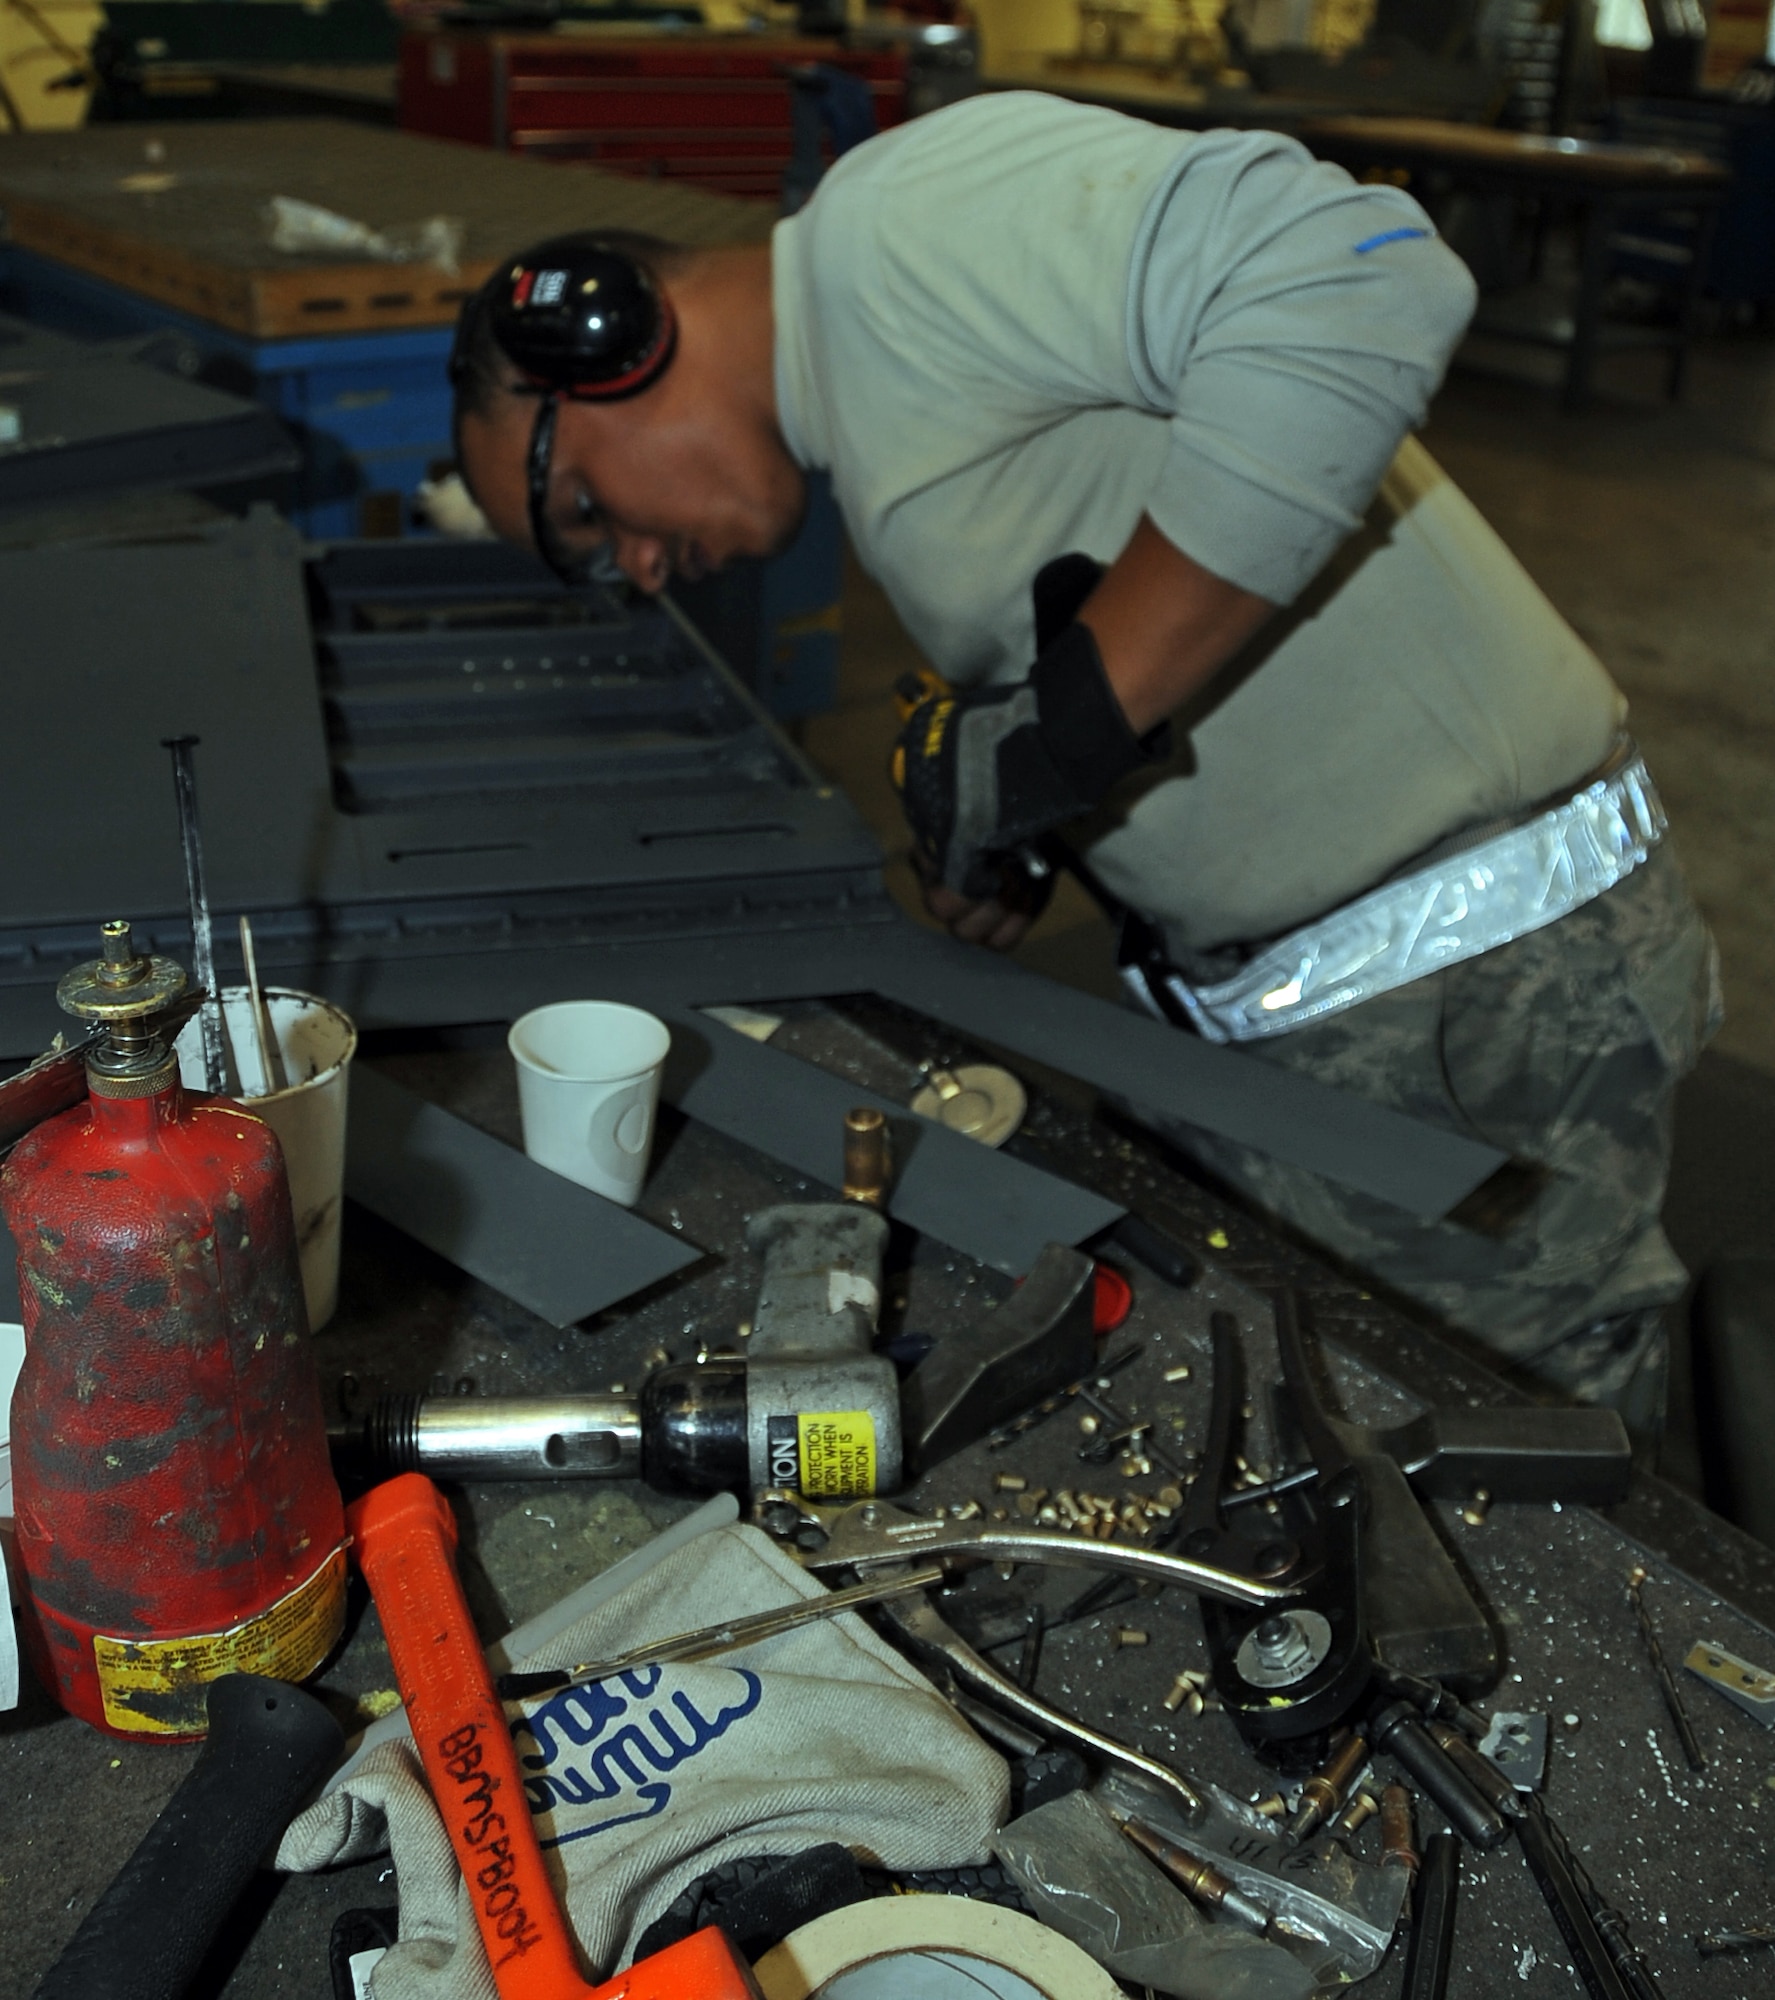 Staff Sgt. Montez Lee, 2nd Maintenance Squadron aircraft structural maintenance craftsman, uses rivets and bucking bars on a B-52H Stratofortress spoiler at Barksdale Air Force Base, La., Nov. 13, 2014. Airmen from the 2nd MXS, aircraft structural maintenance shop repair or replace sheet metal and fix loose rivets and cracks on the B-52. (U.S. Air Force photo/Staff Sgt. Jason McCasland)